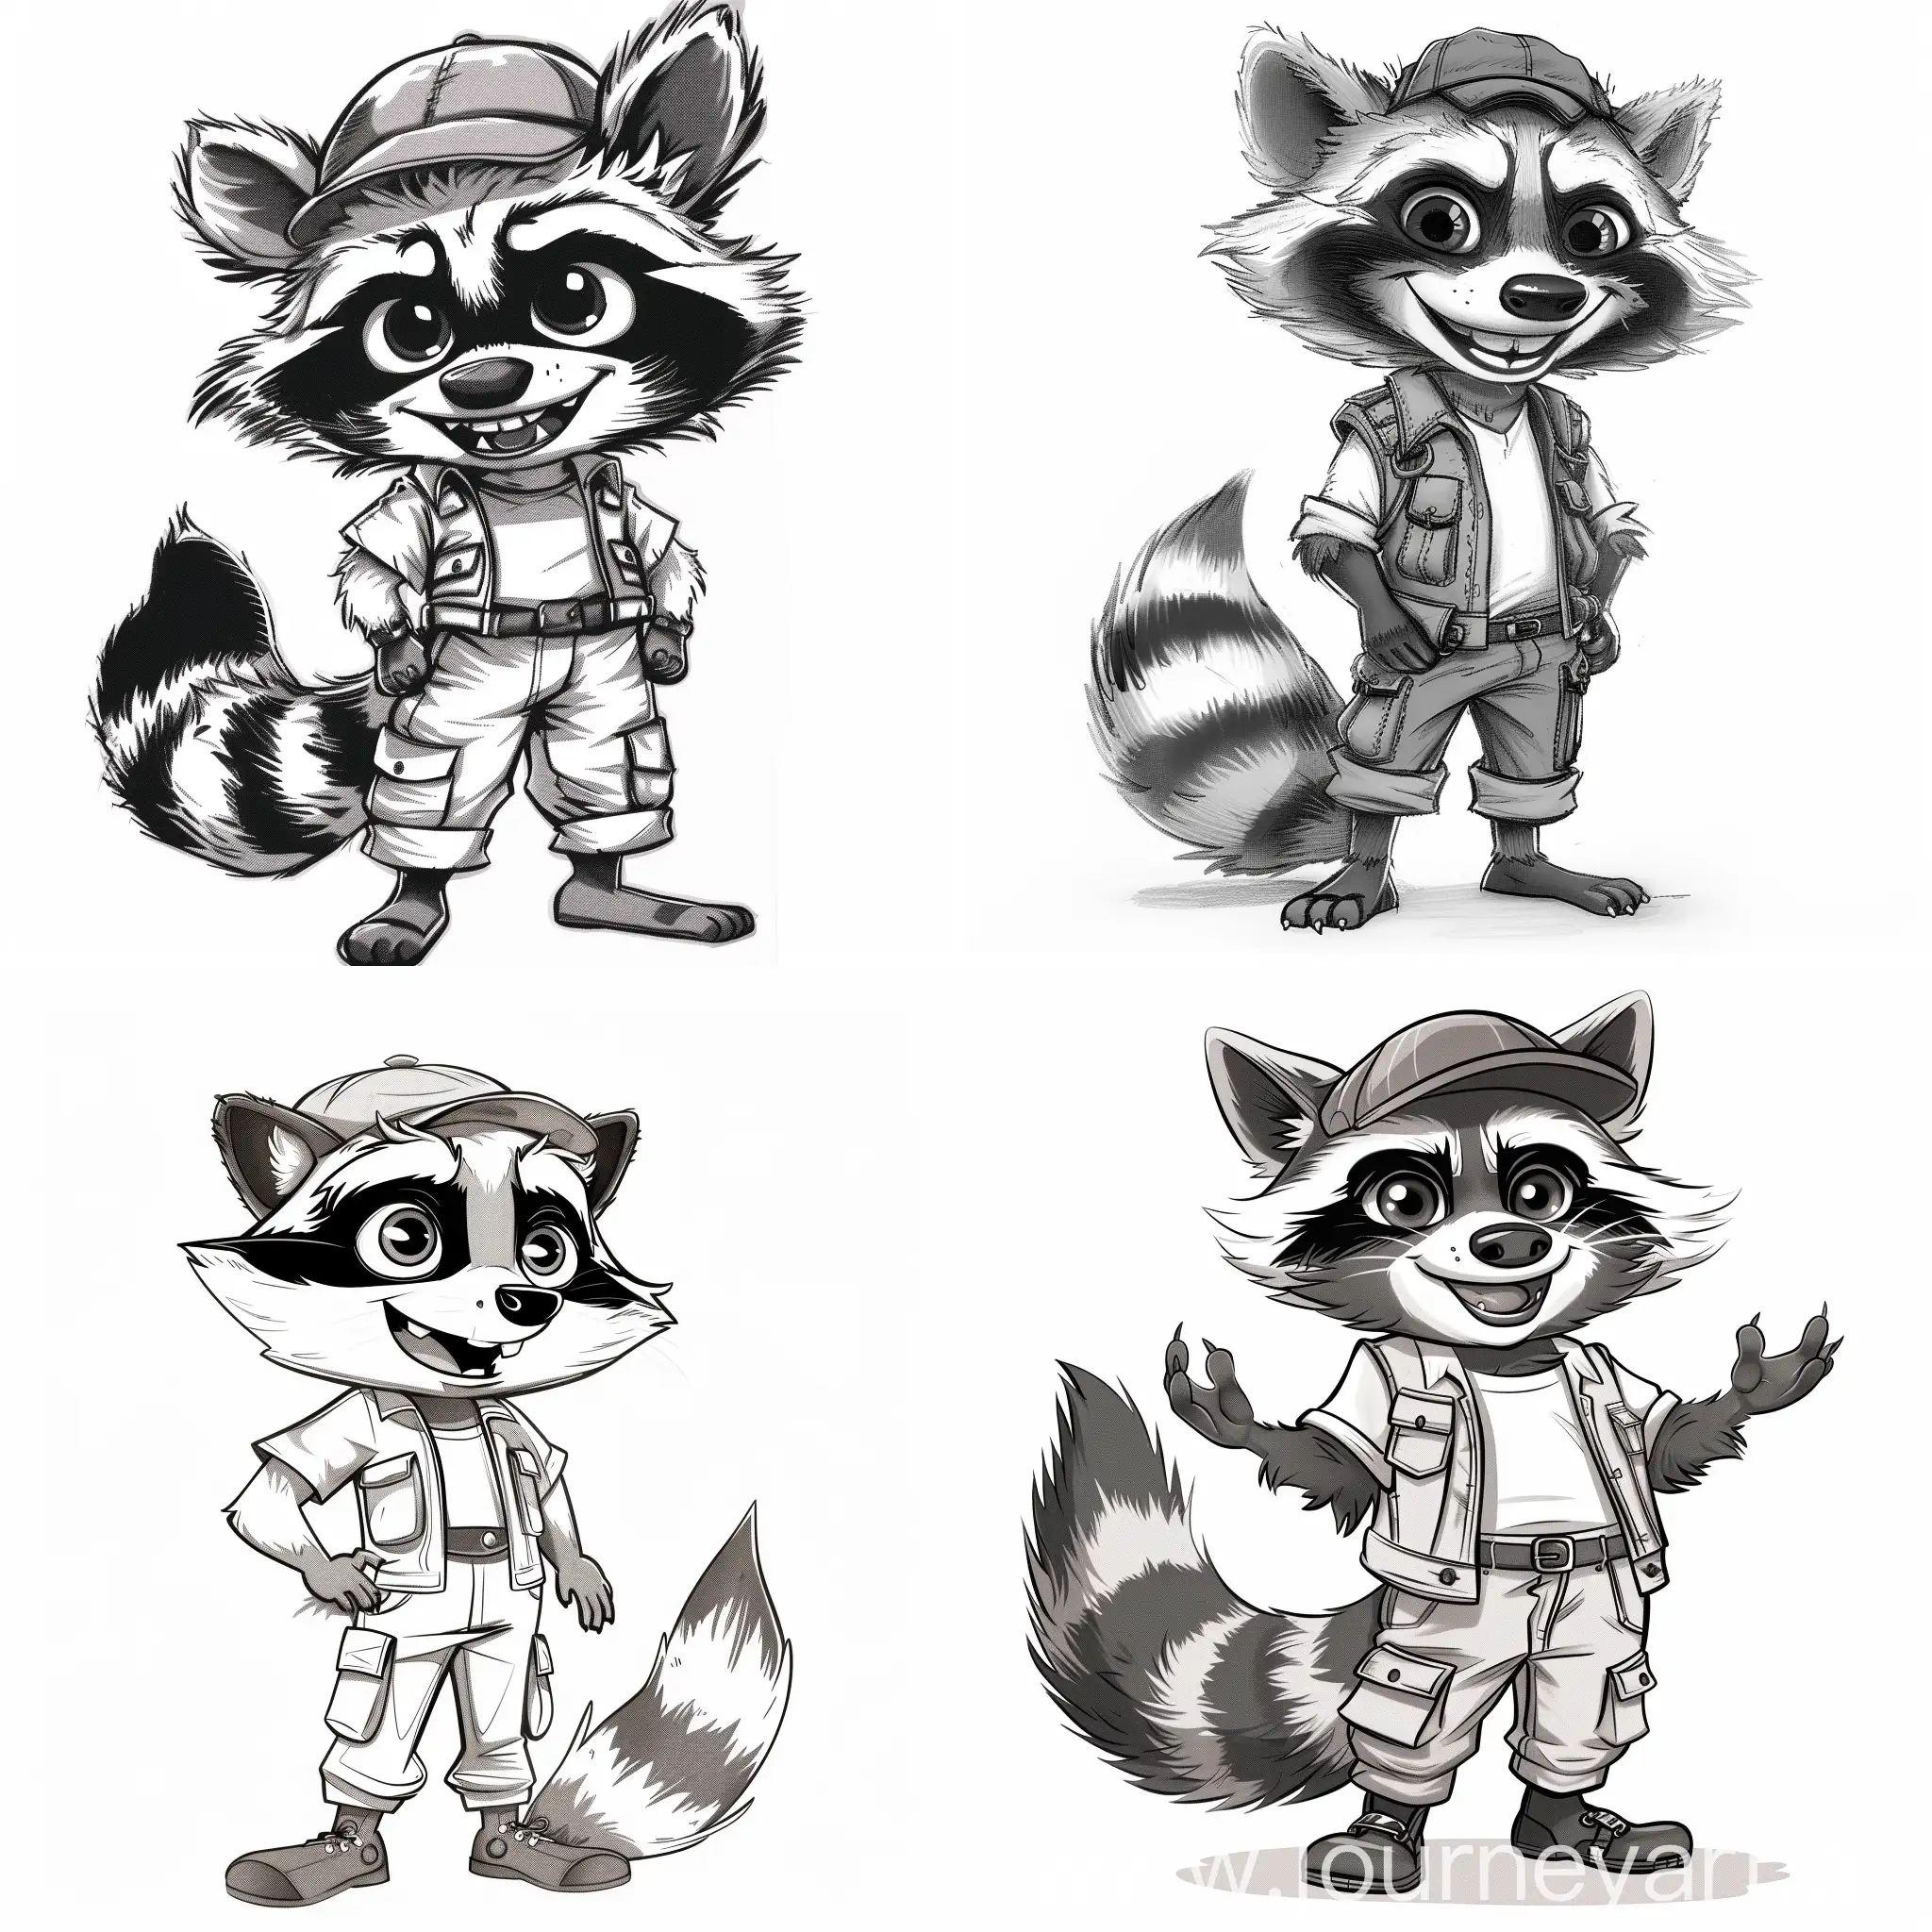 Classic-Animated-Raccoon-in-1930s-Style-Clothing